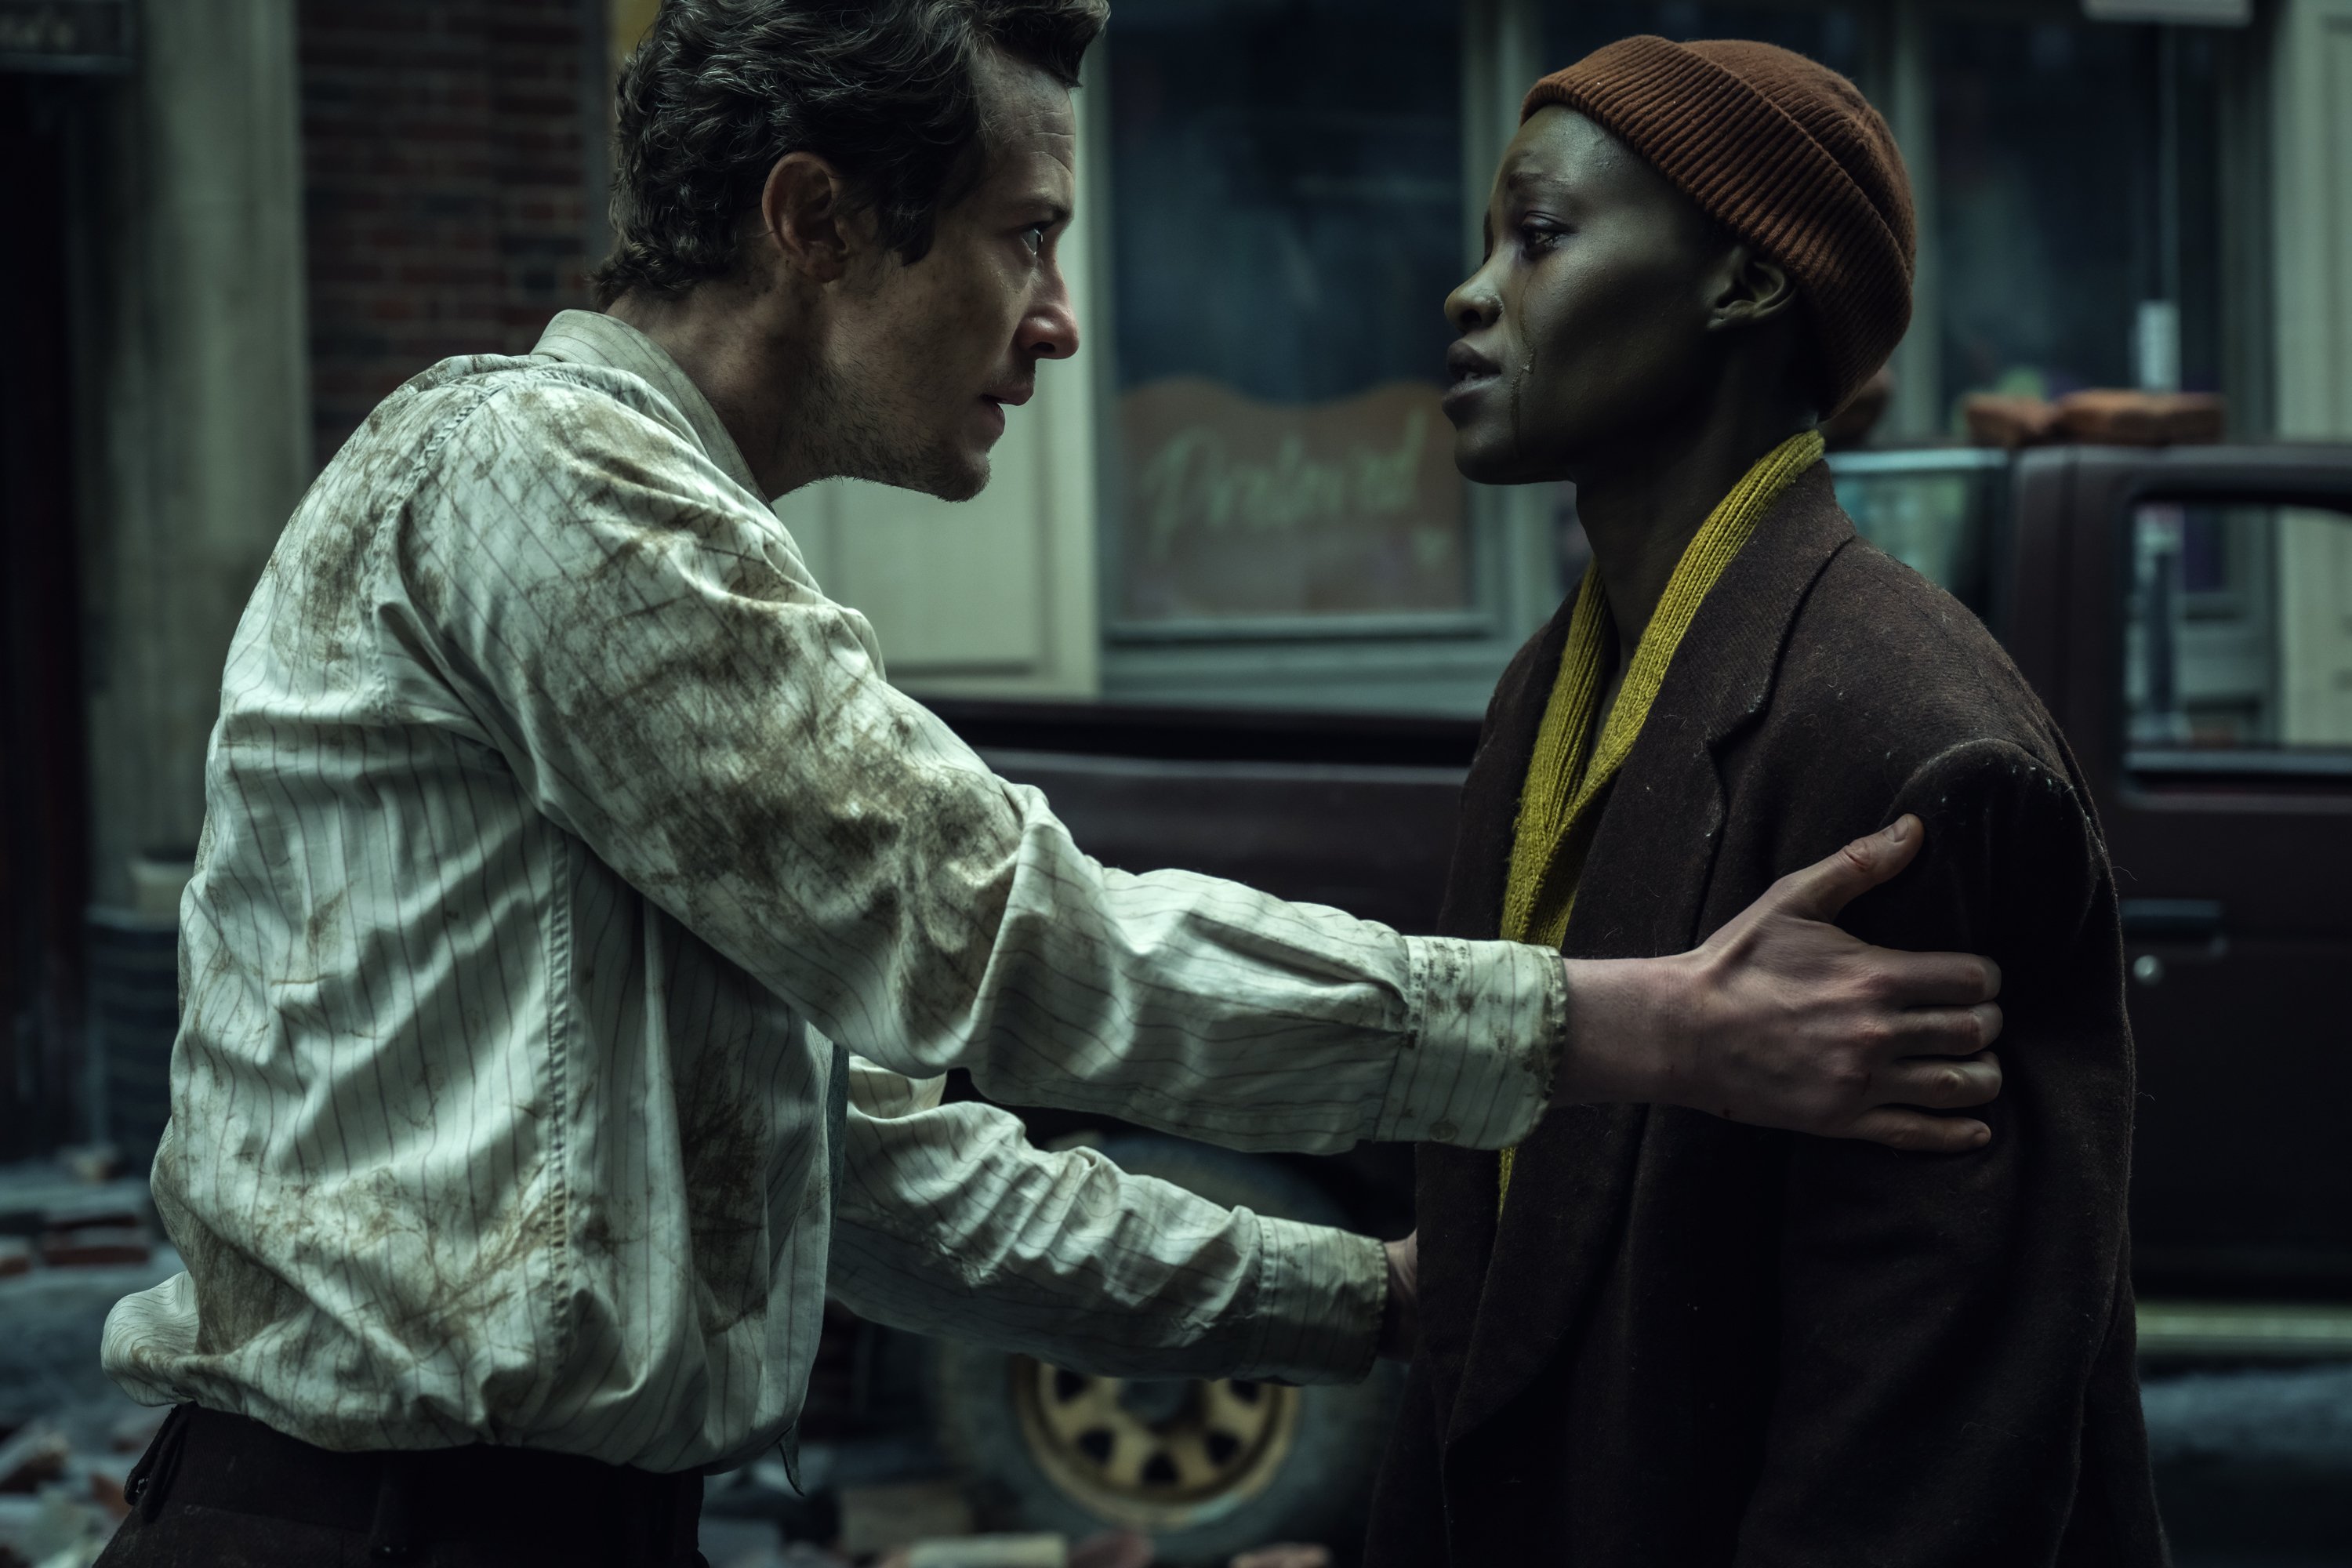 Joseph Quinn as “Eric” and Lupita Nyong’o as “Samira”  in A Quiet Place: Day One from Paramount Pictures.